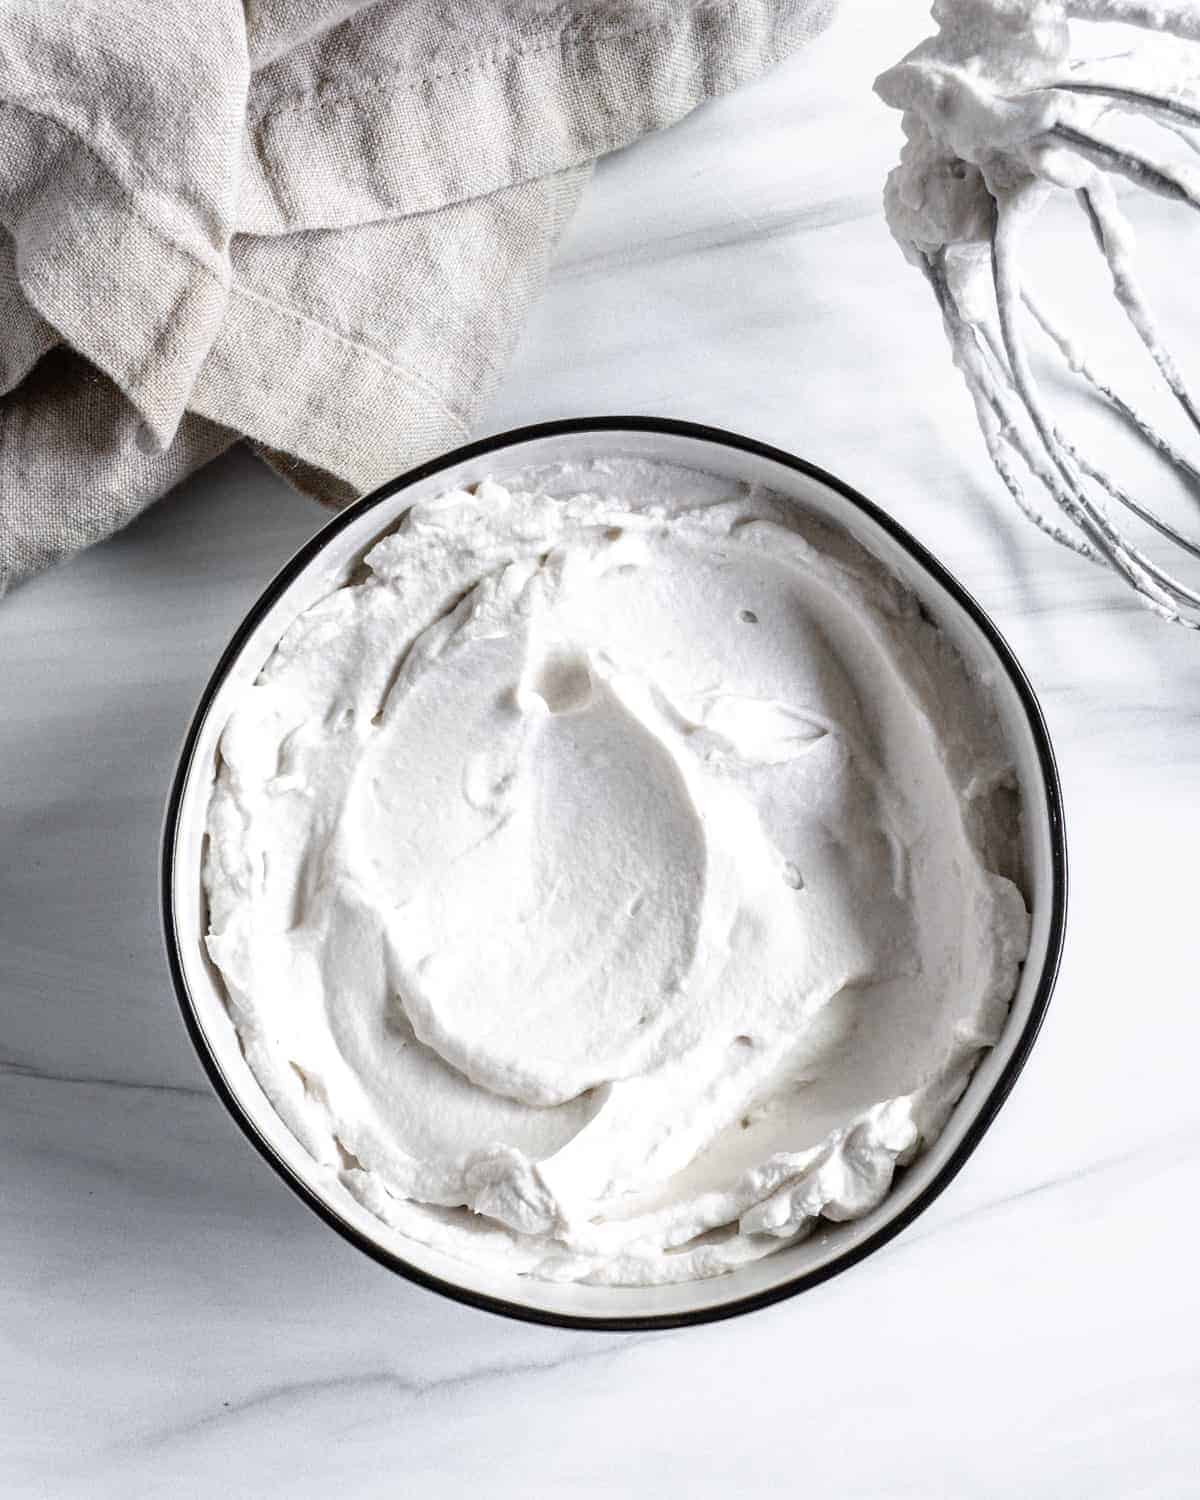 completed vegan whipped cream with mixing bowl against white background